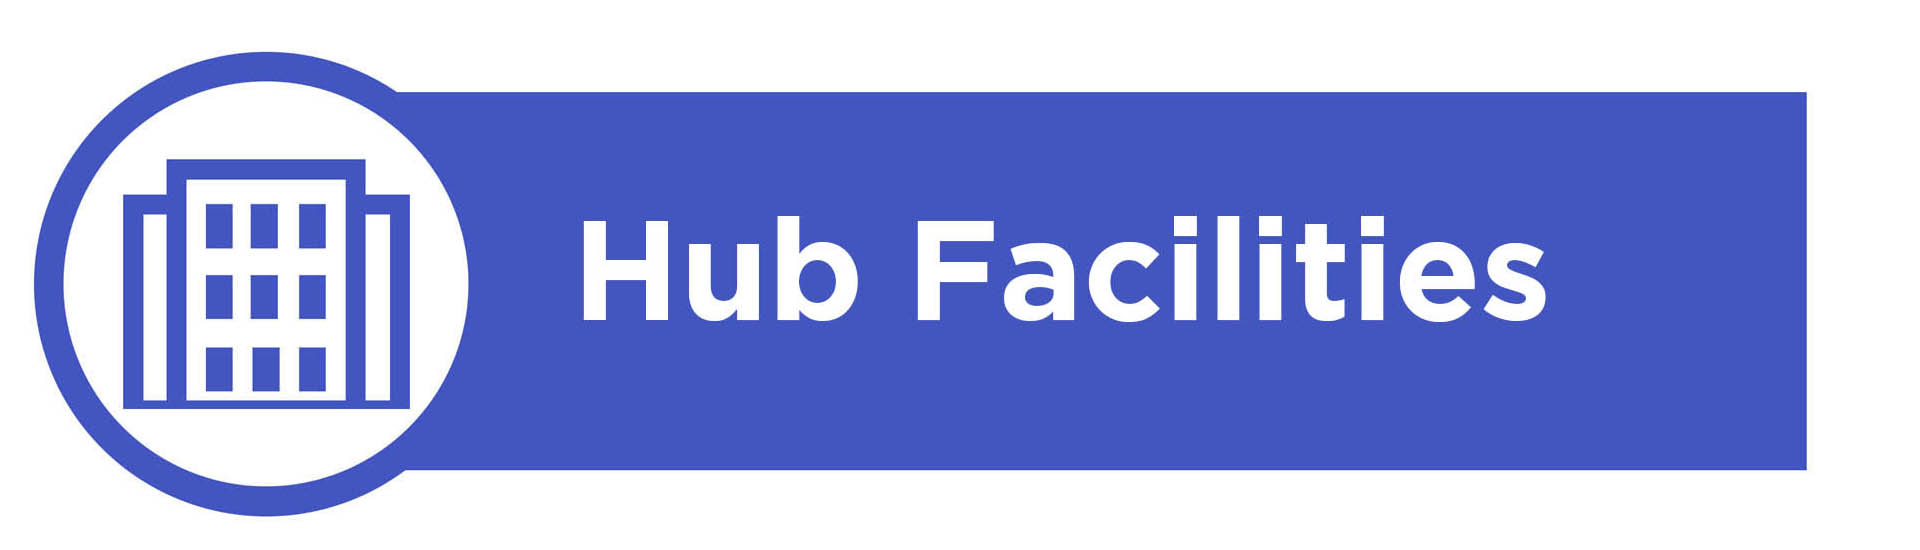 Banner image containing the text 'Hub Facilities'